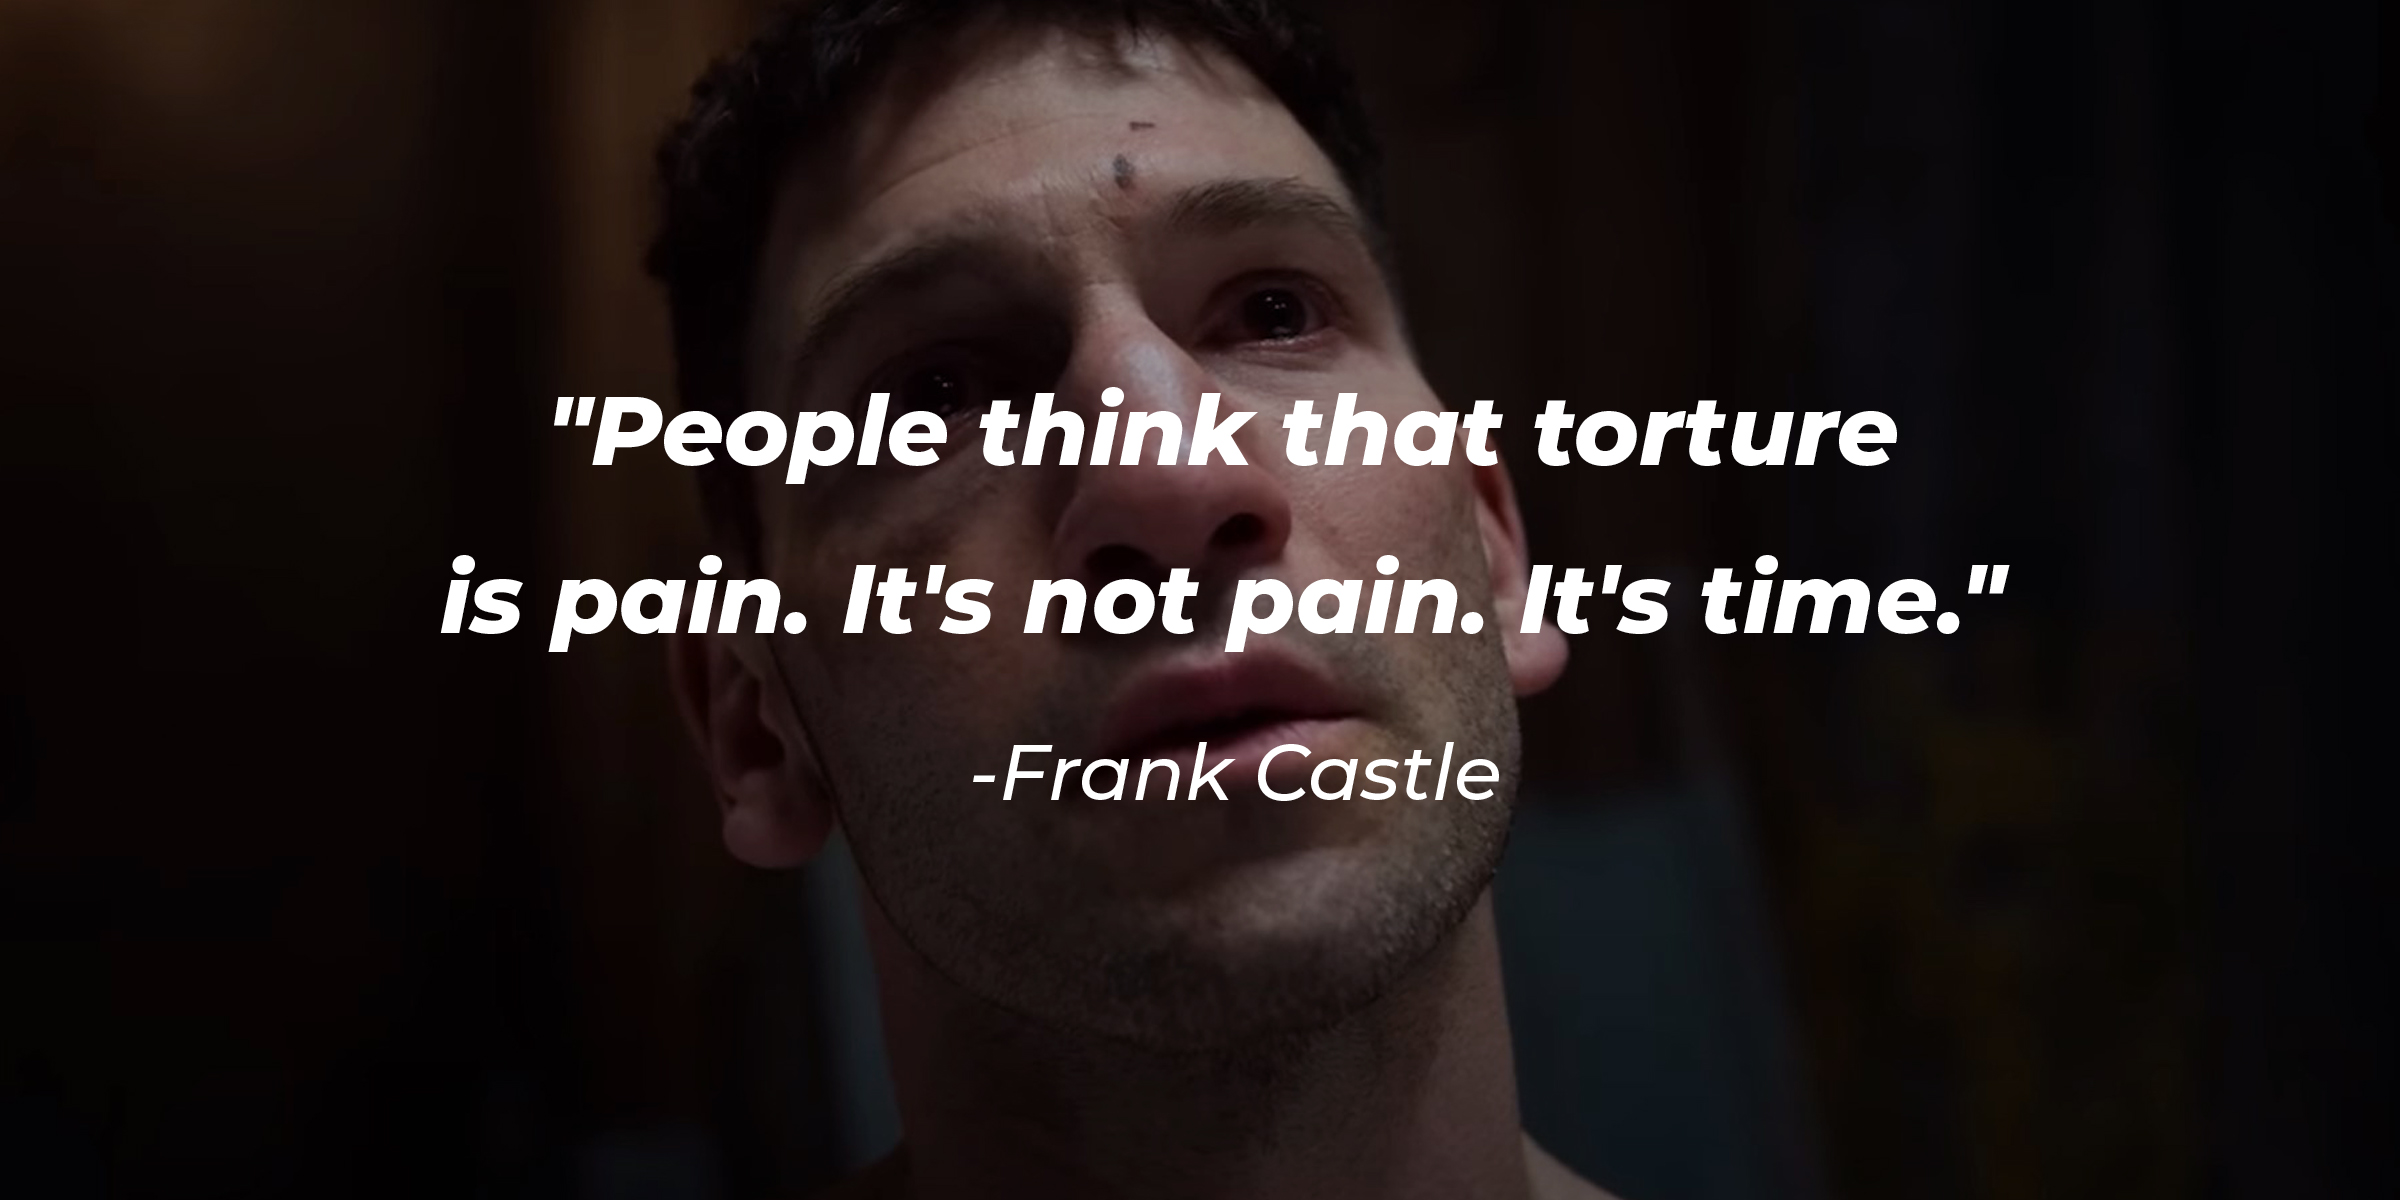 An image of Frank Castle with the quote, "People think that torture is pain. It's not pain. It's time." | Source: facebook.com/MarvelsPunisher